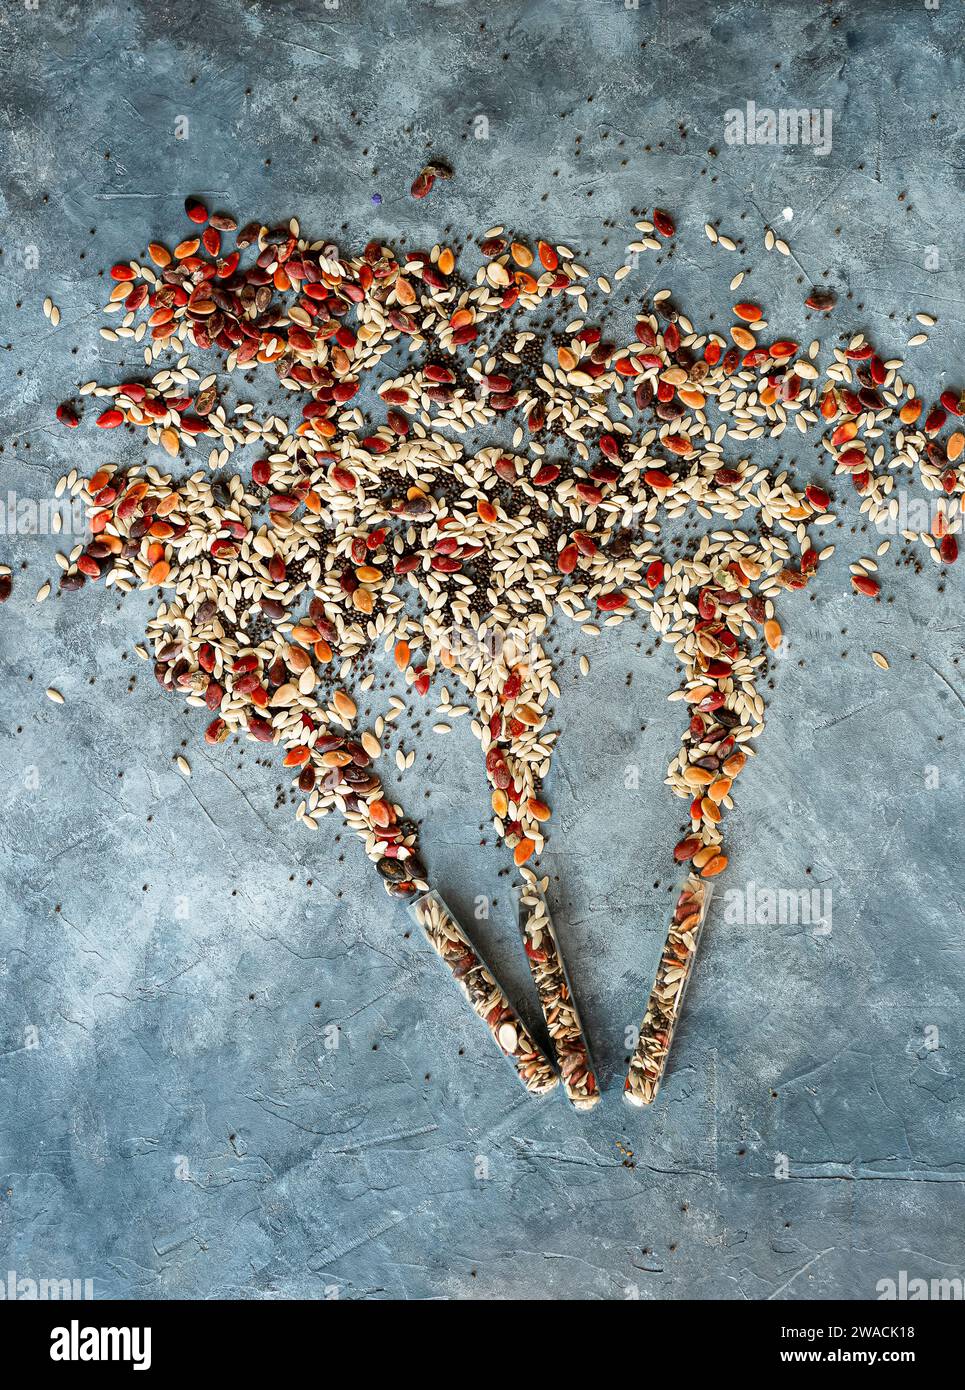 explosion of multicolored seeds from swarm tubes on a grey background. pumpkin seeds, poppies, beans, etc. Stock Photo